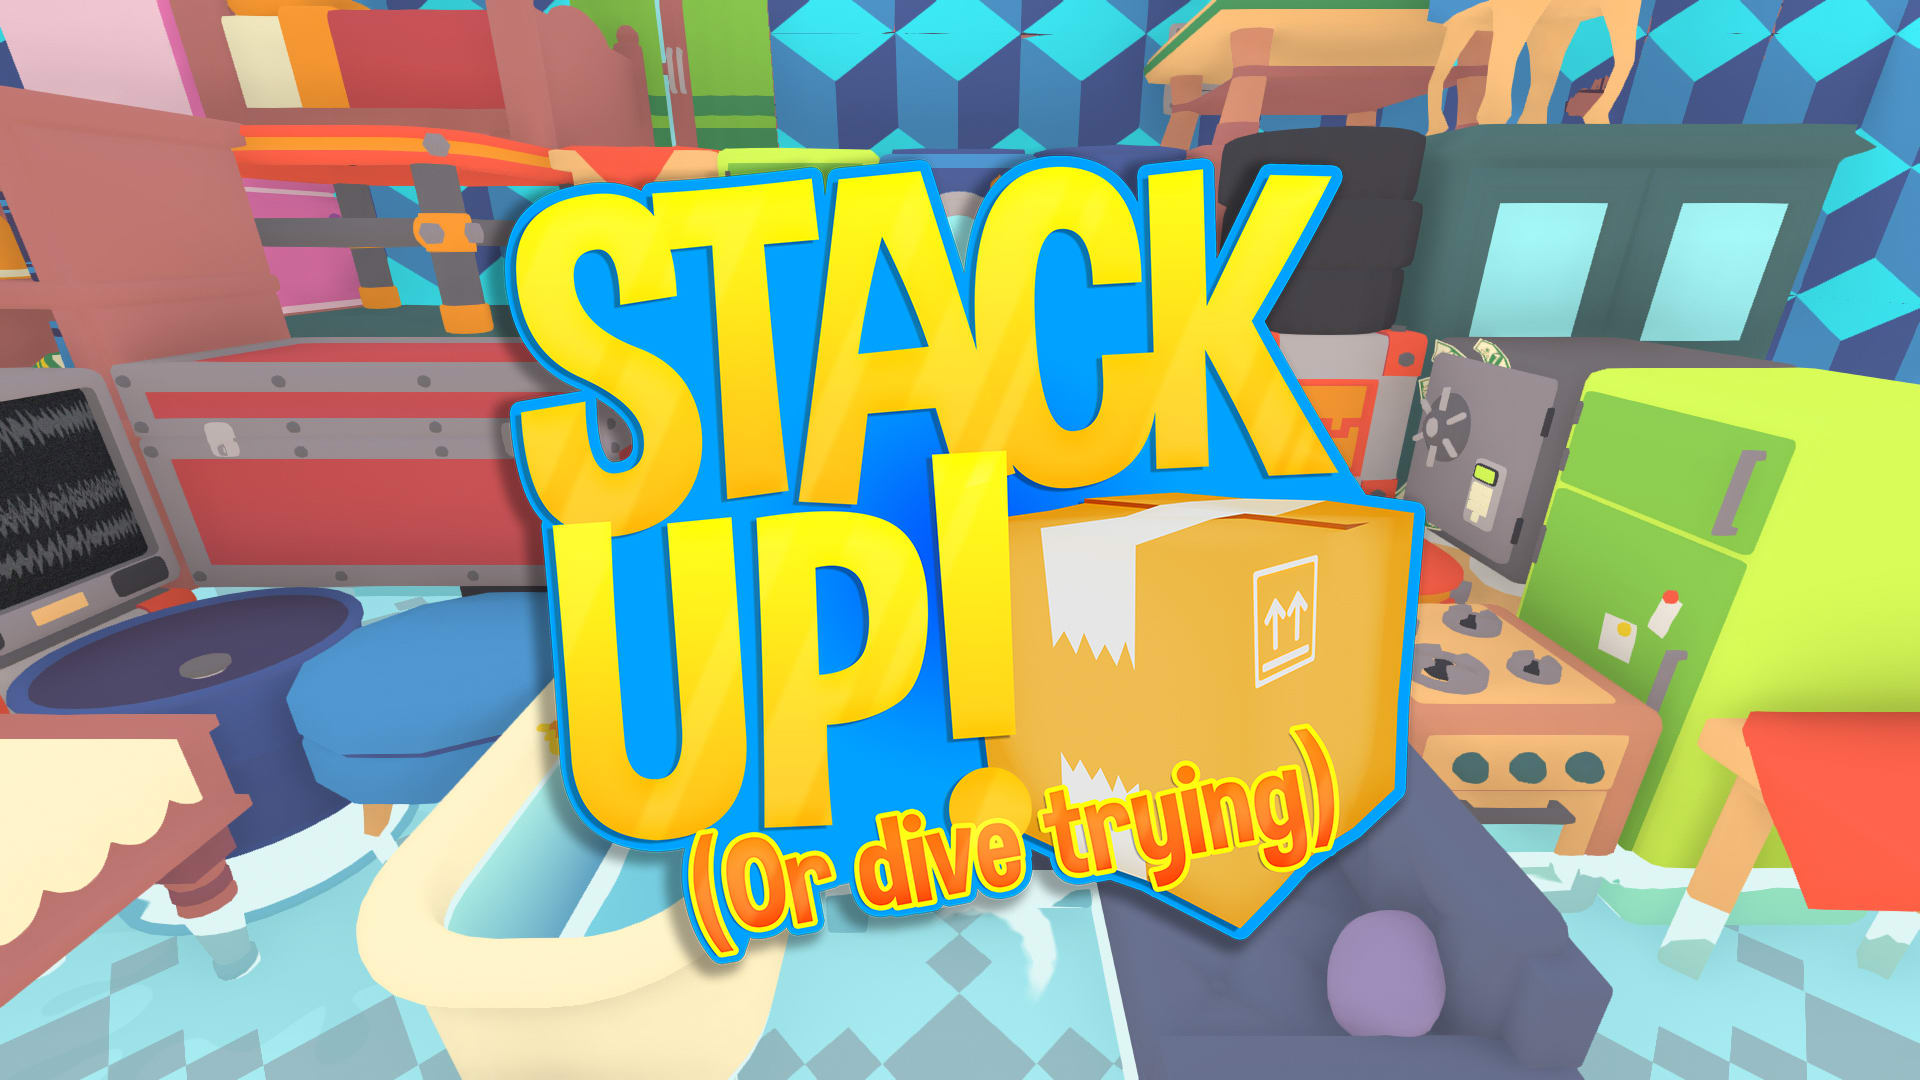 Stack Up! (or dive trying)